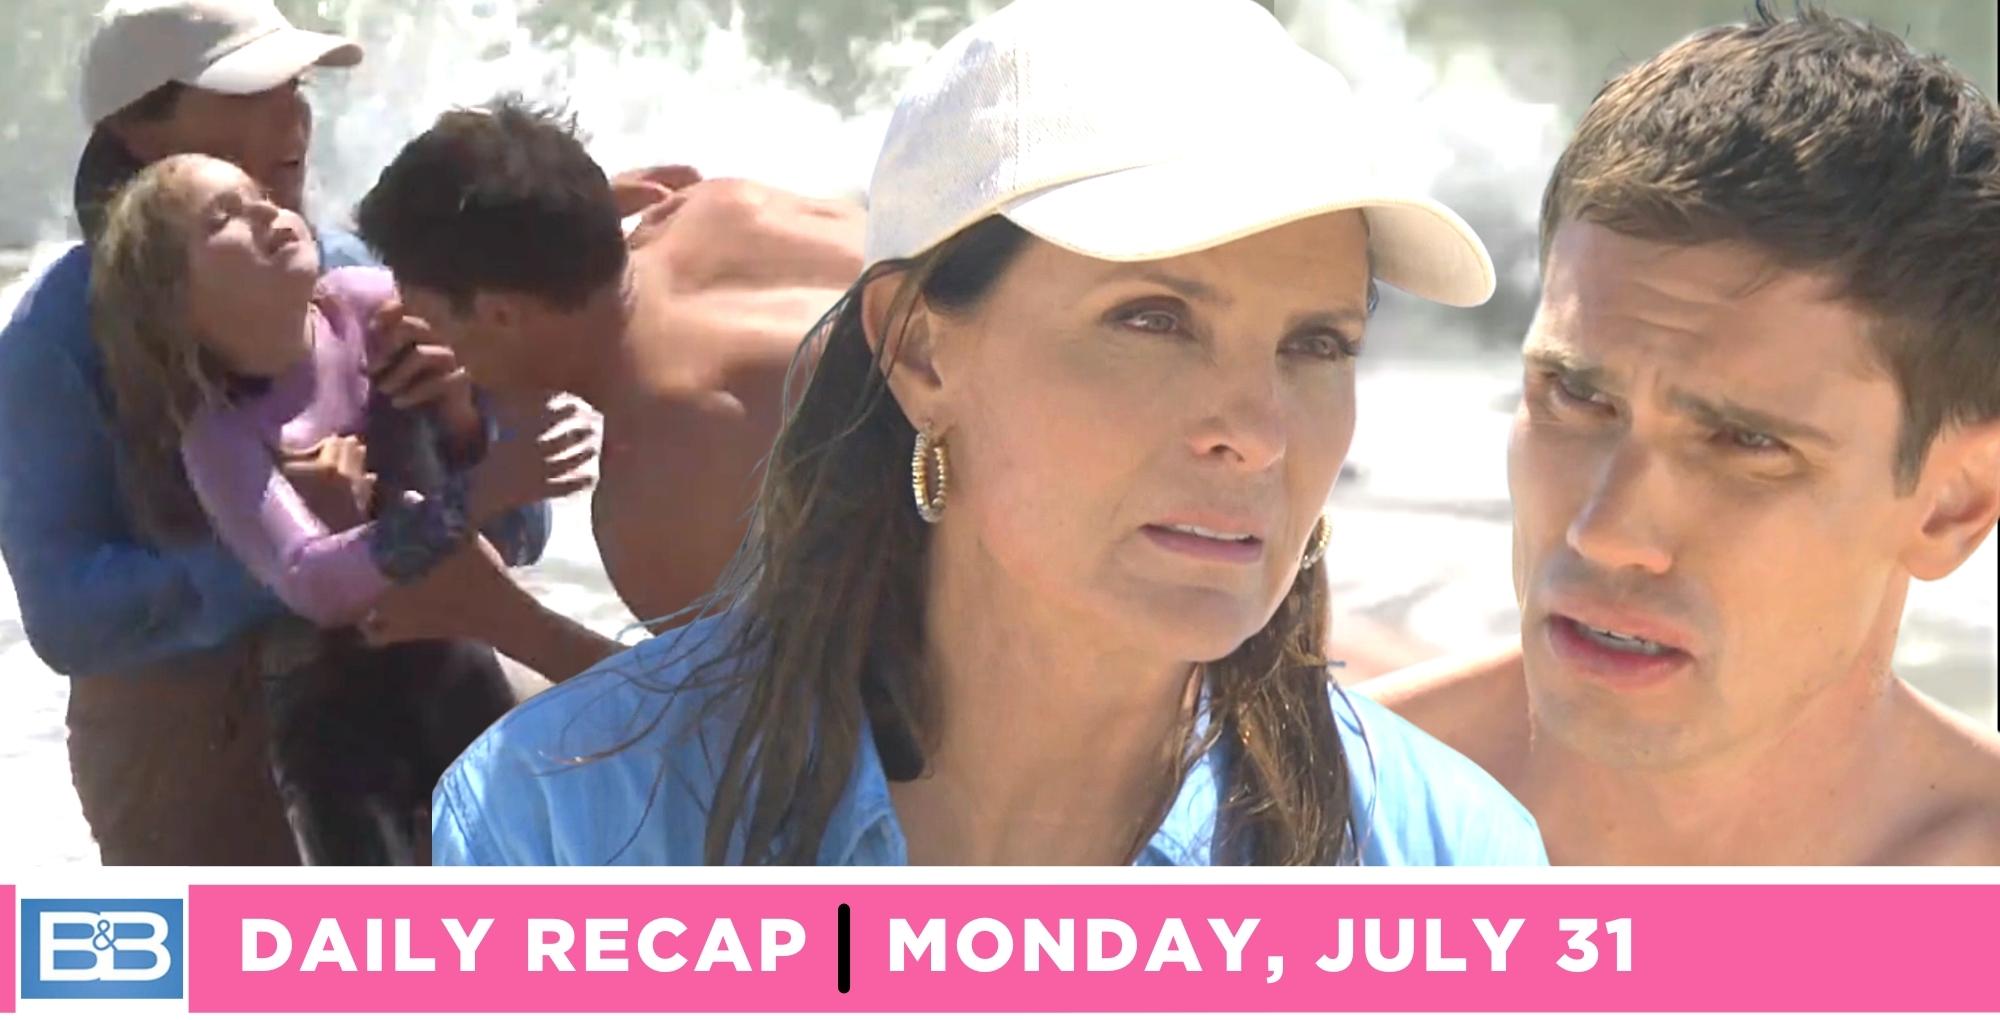 sheila carter saved kelly spencer when finn didn't hear her cries on the bold and the beautiful recap for july 31, 2023.